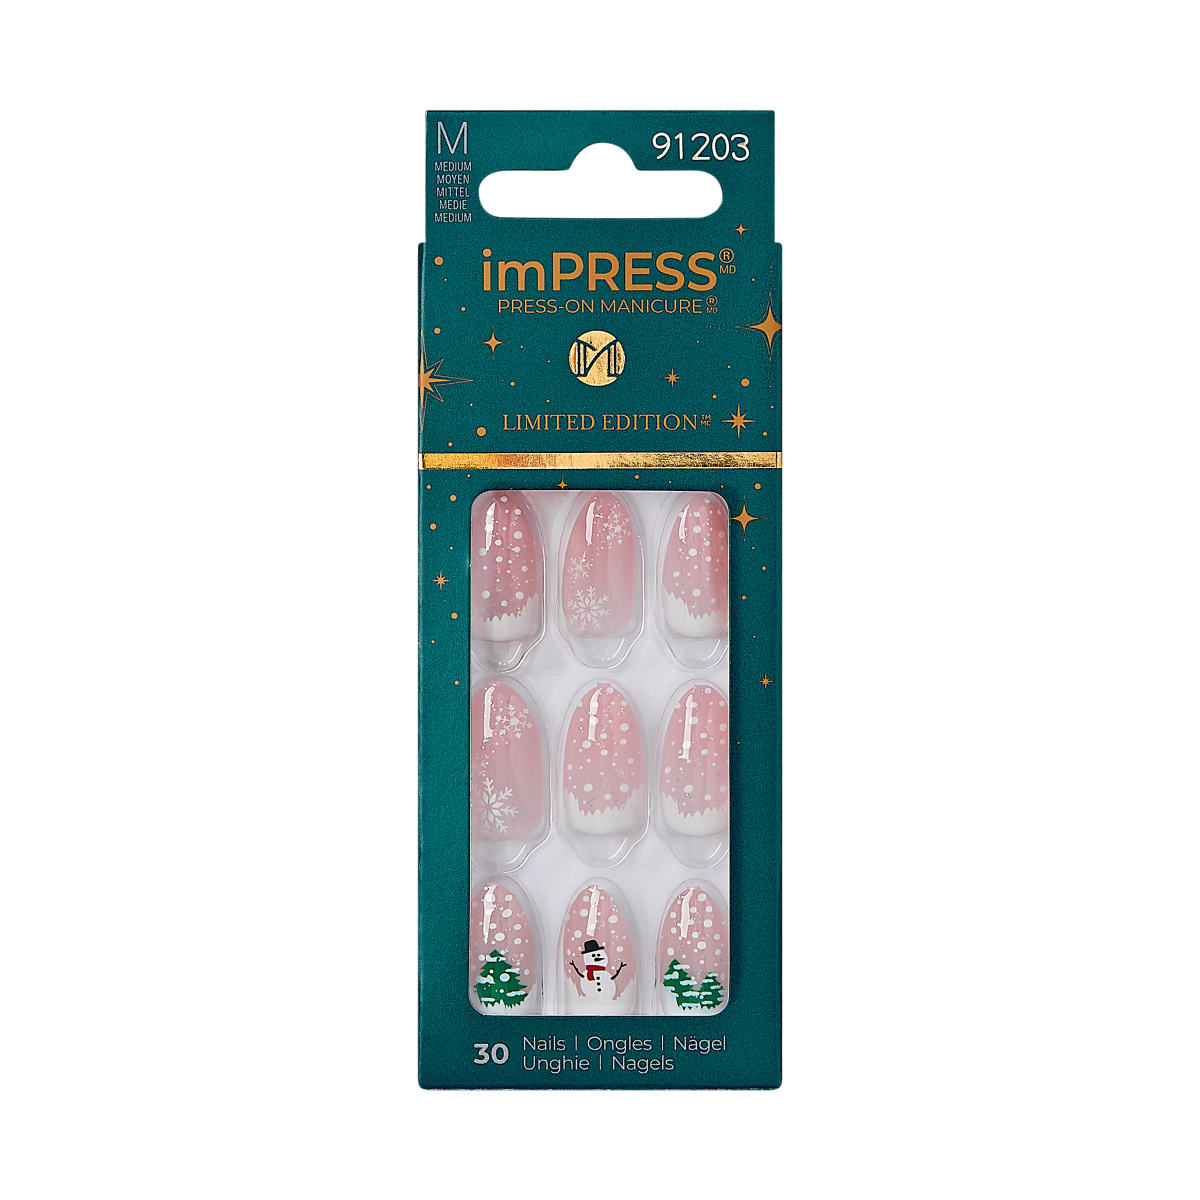 imPRESS Holiday Press-On Manicure - Love At Frost Sight